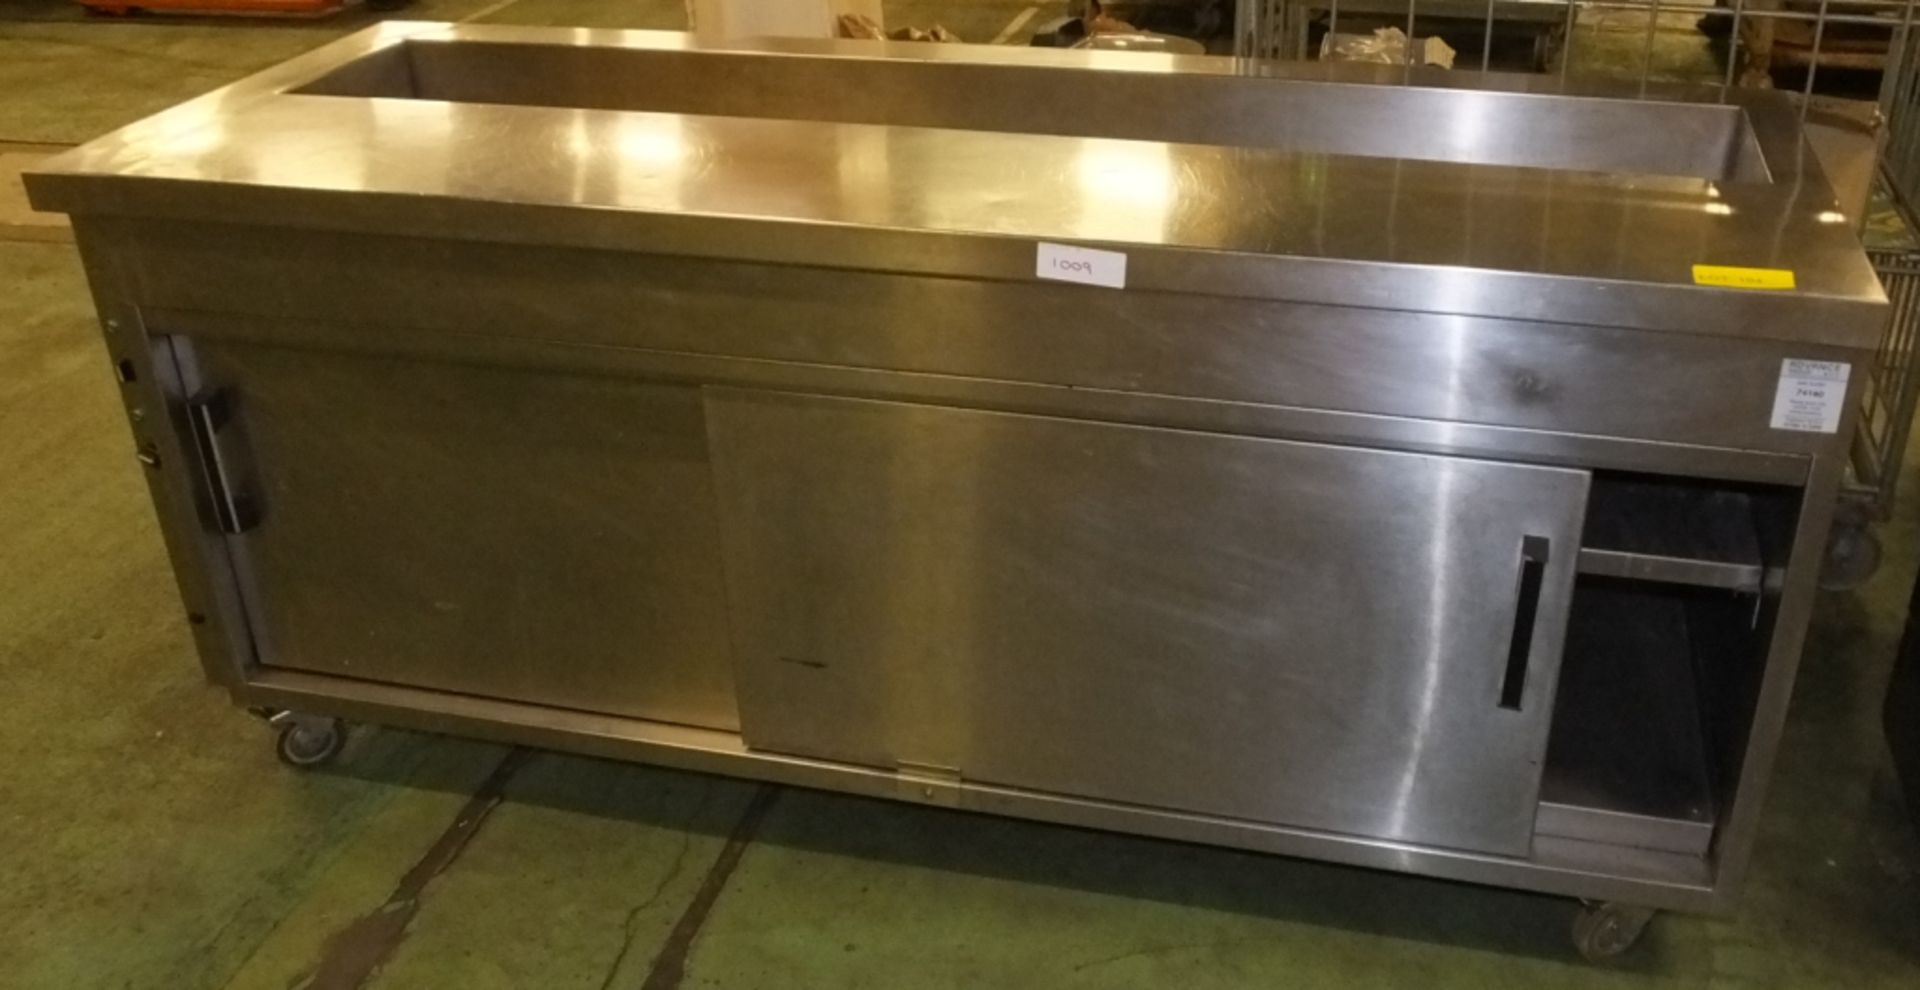 Bain Marie & Hot cupboard - Please note there will be a loading fee of £5 on this item